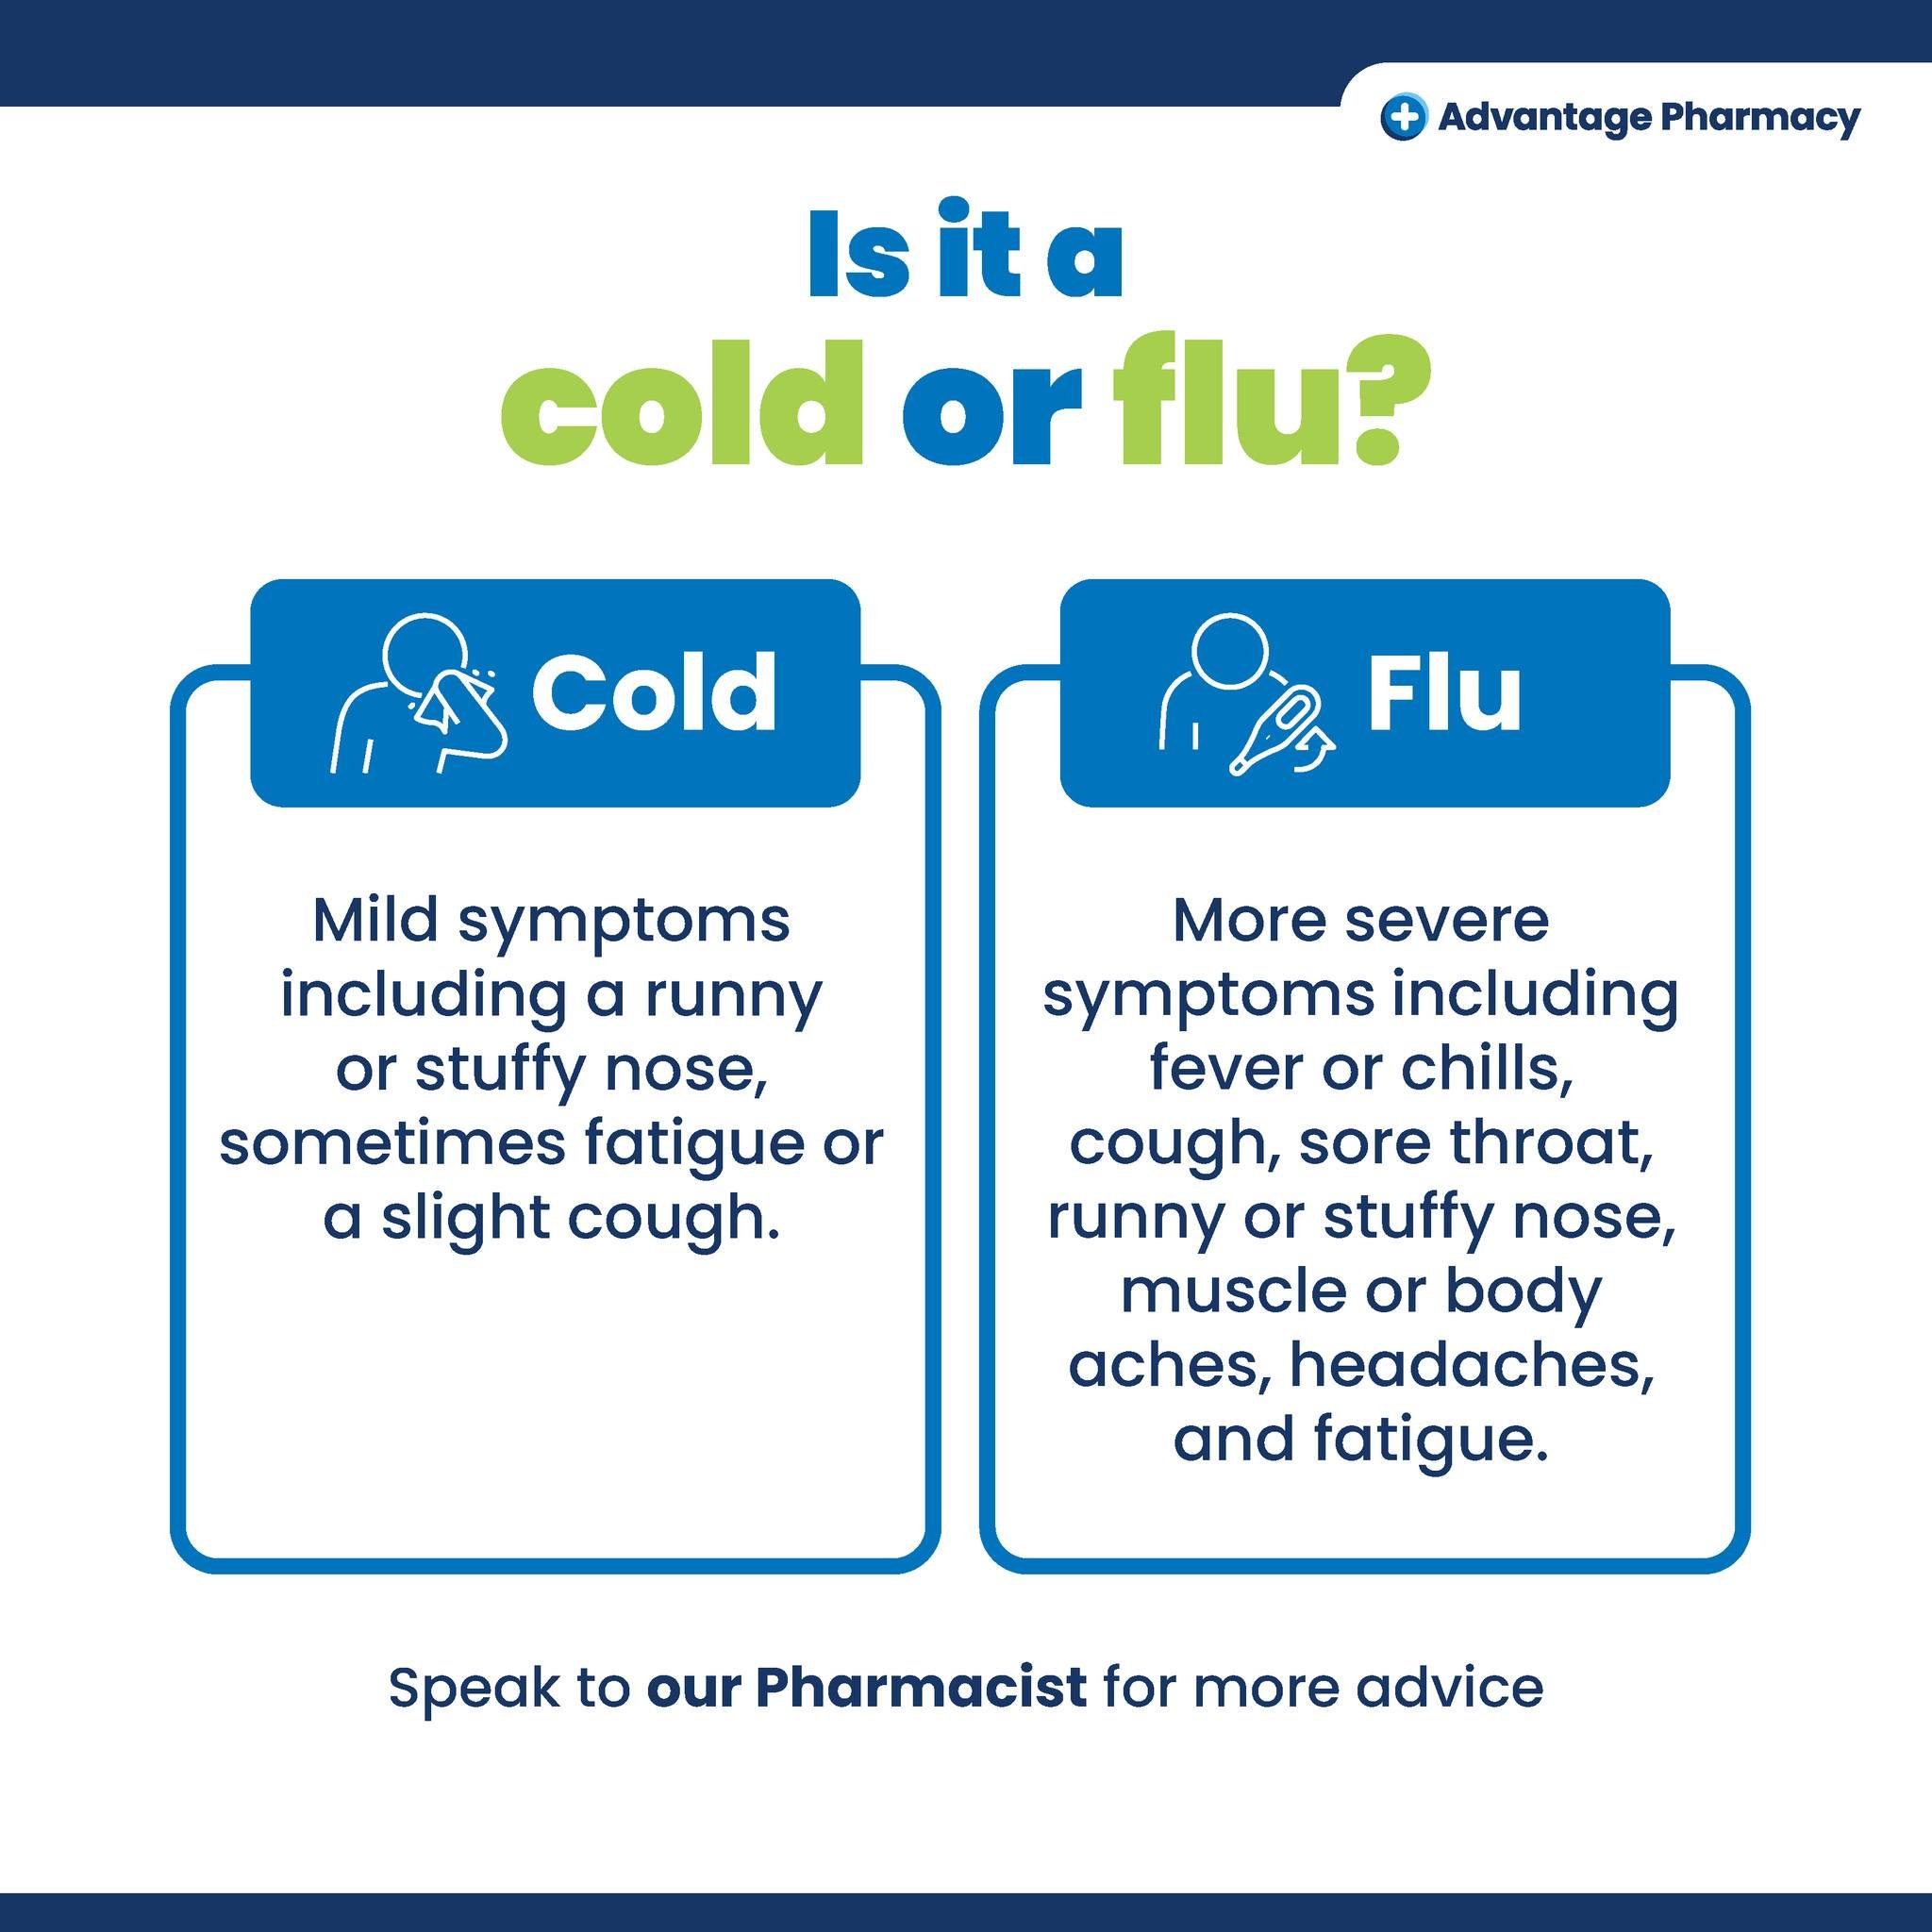 The flu and the common cold are both contagious illnesses, but they are caused by different viruses. Flu is caused by influenza viruses only, whereas the common cold can be caused by a number of different viruses such as rhinoviruses and parainfluenz